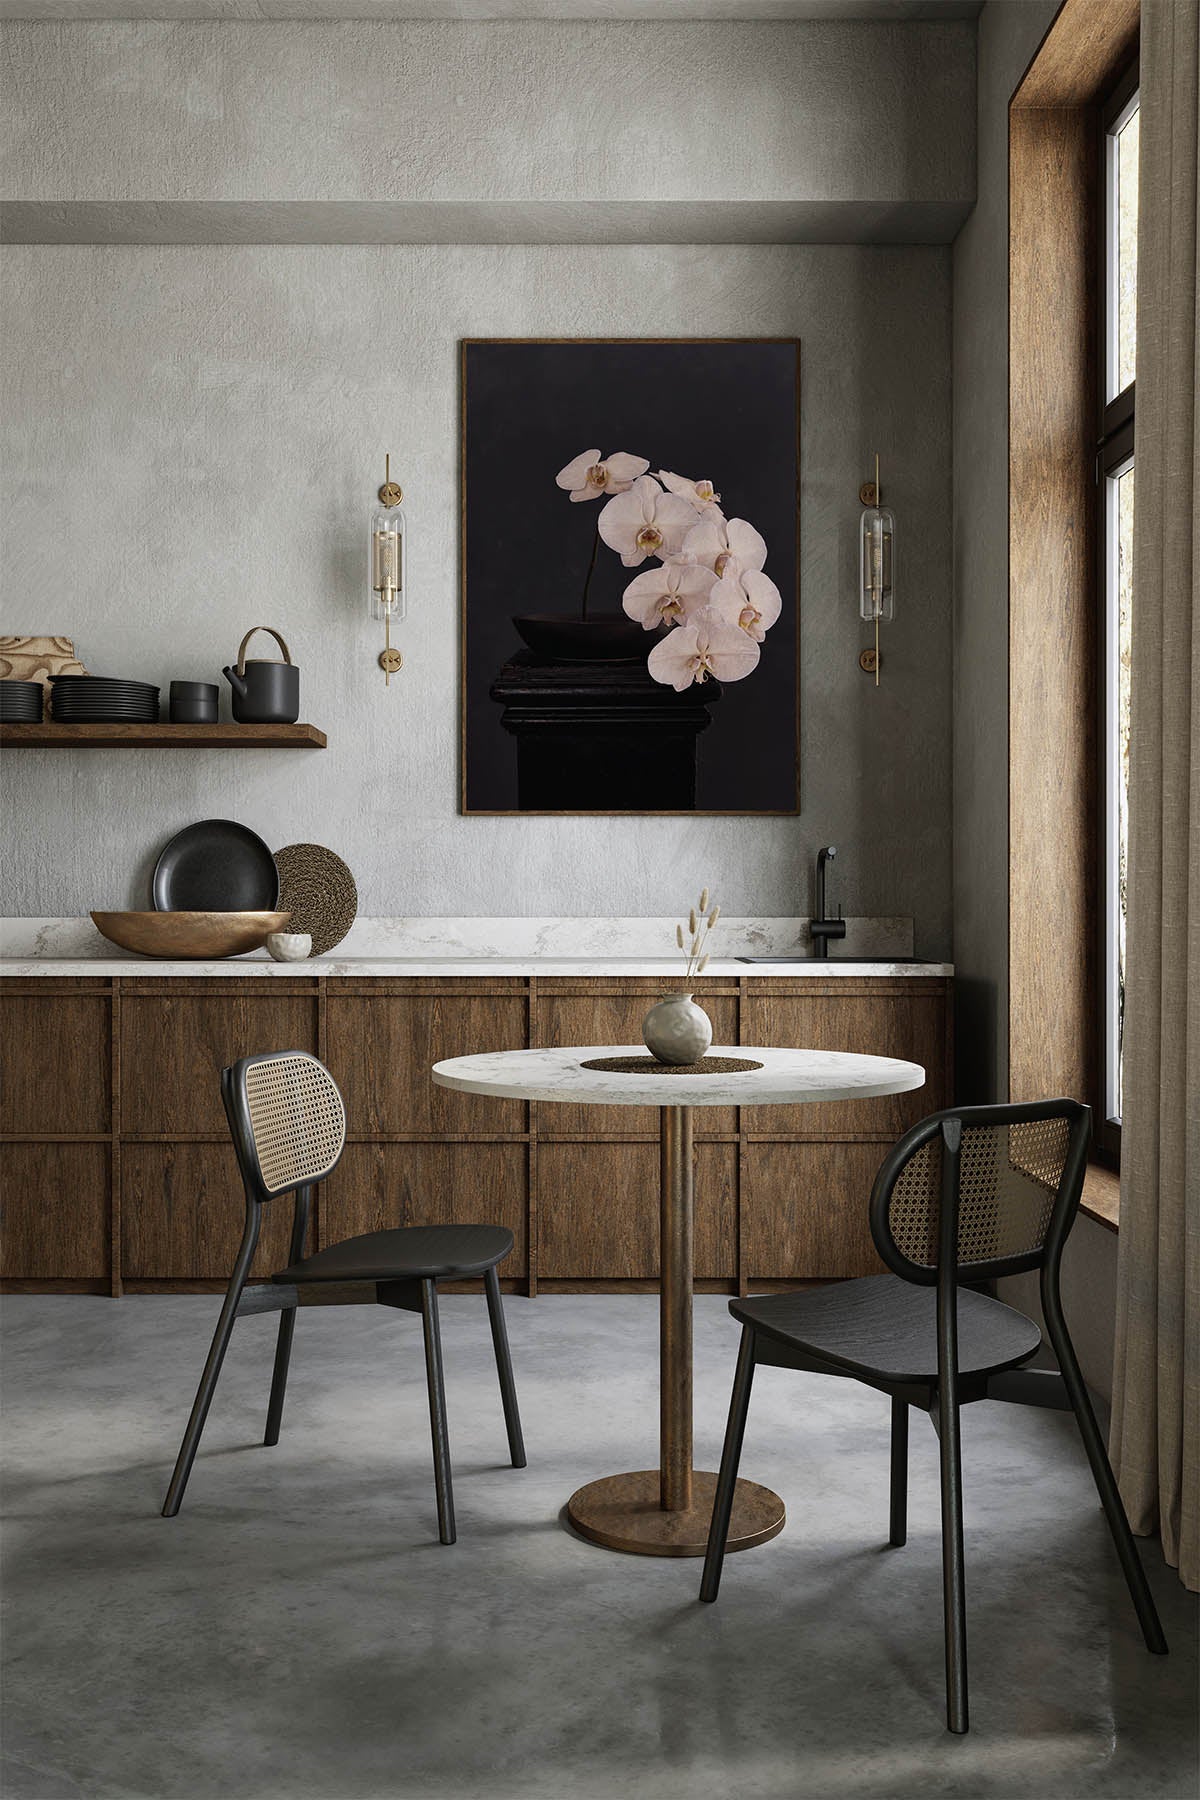 Fine Art Print Of A White Phaleanopsis Stem In A Black Bowl On A Black Mantle With A Black Rustic Background In A Modern Kitchen With Walnut Cabinetry and A Danish Table With 2 Chairs In Black With Mesh Backs. 